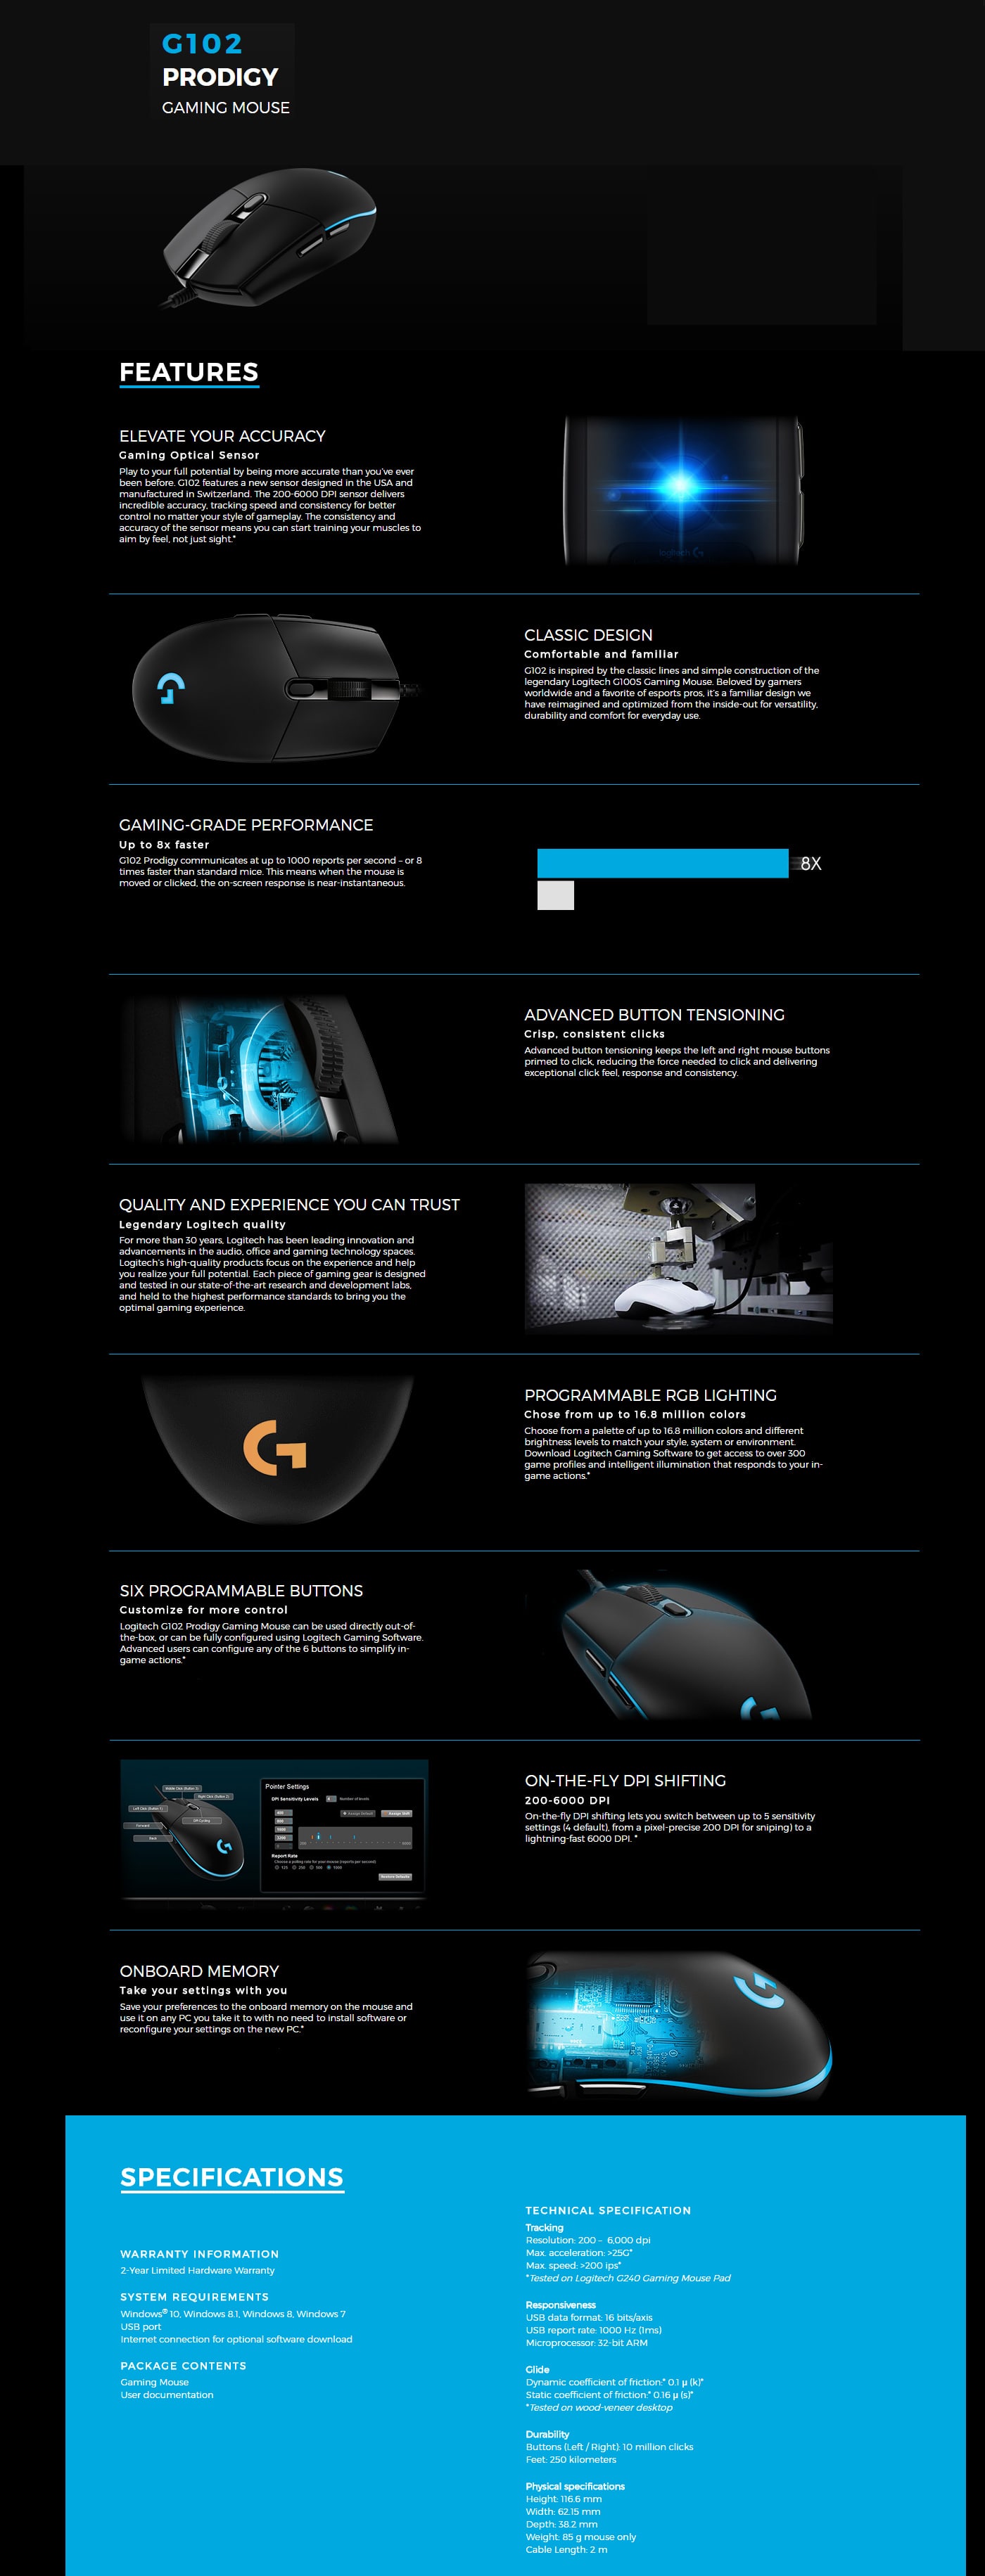 Logitech G102 Prodigy Gaming Mouse features